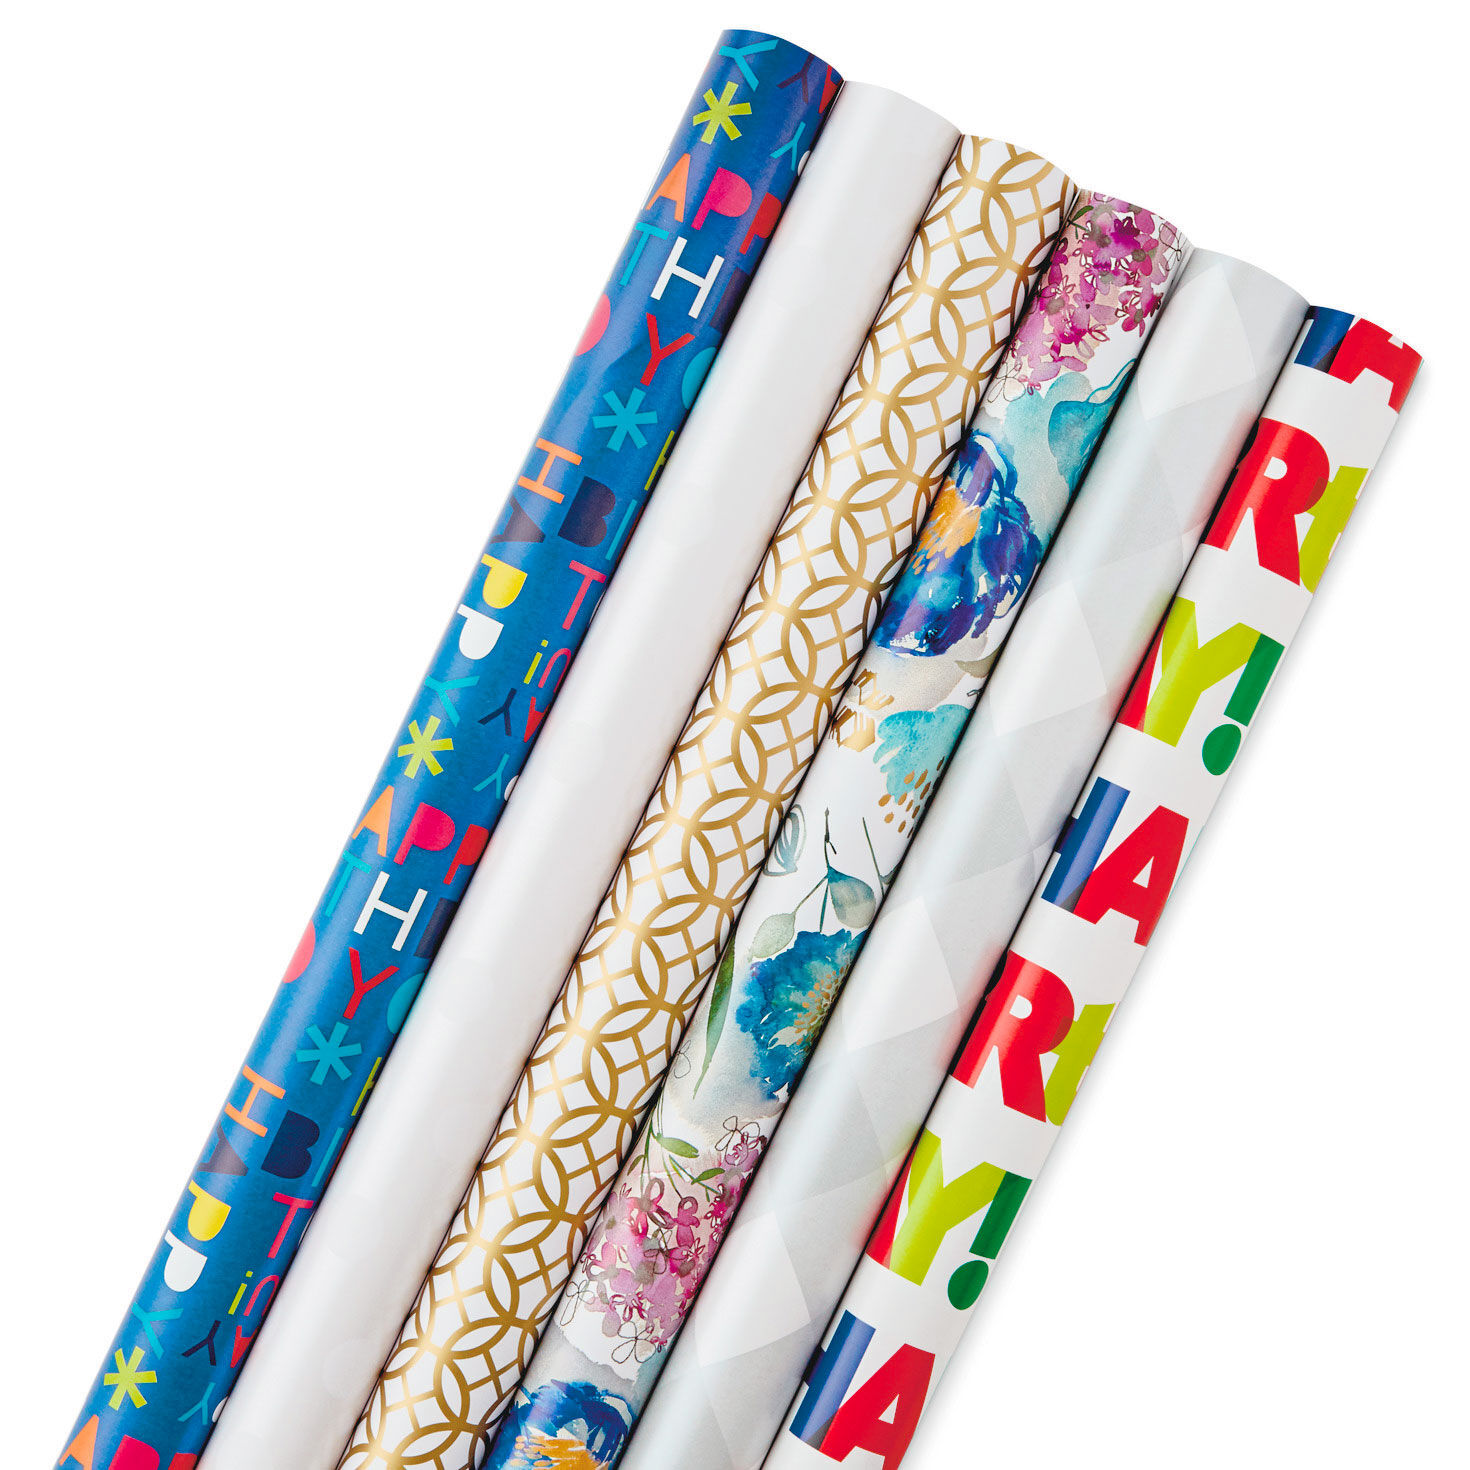 All Occasions Wrapping Paper Rolls, 6 Pack - Wrapping Paper Sets